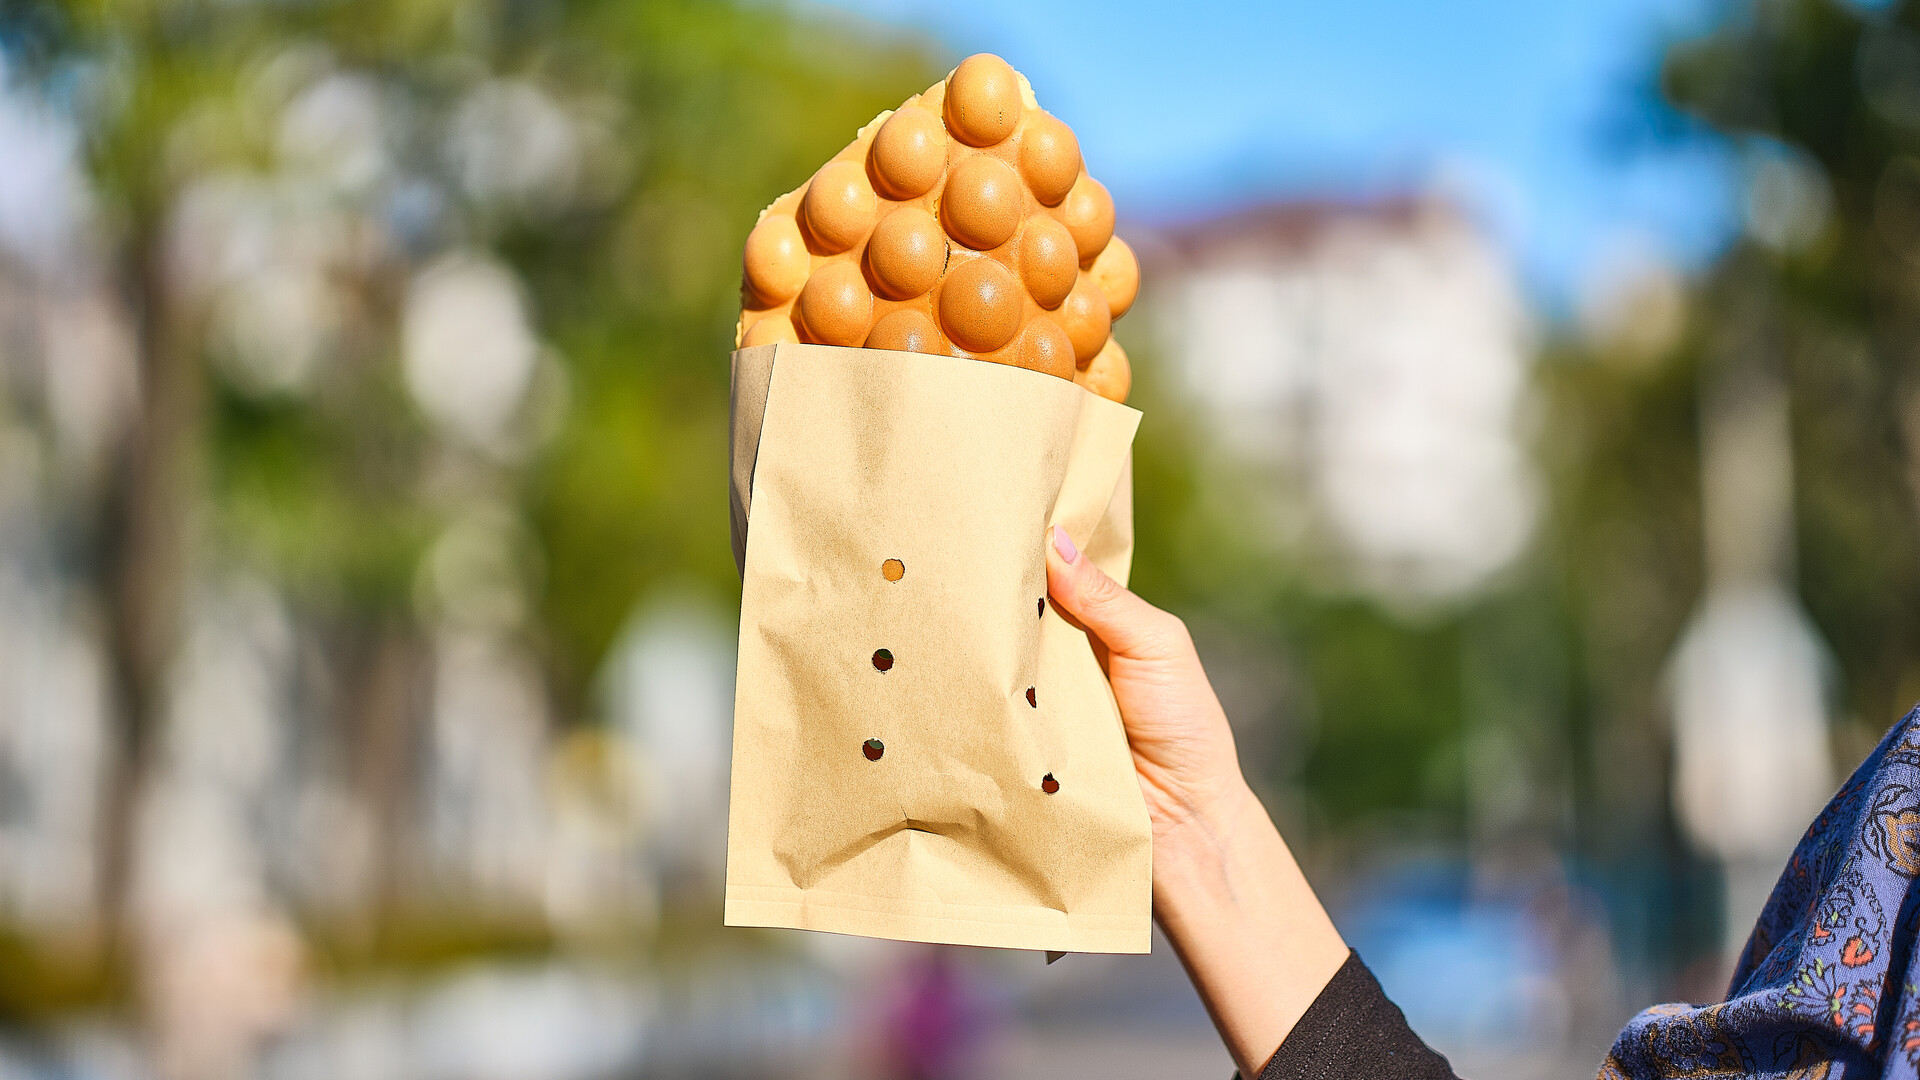 Hand holding a paper cone filled with bubble waffles, outdoor background